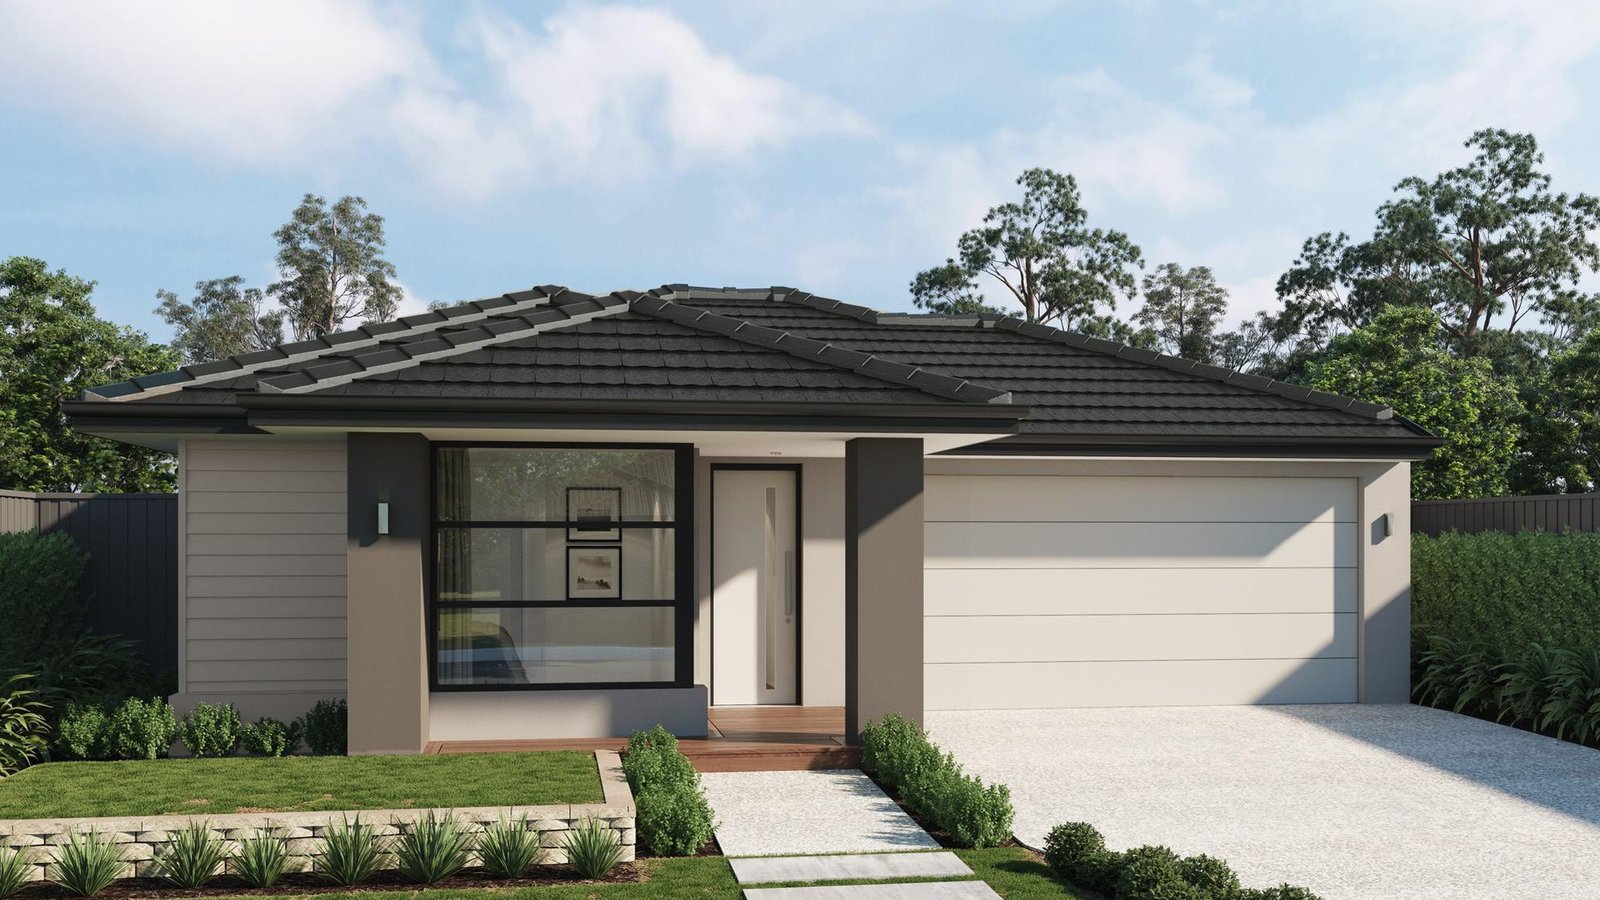 Photo of Lot 1226 Rees Road, Weir Views VIC 3338 AUS